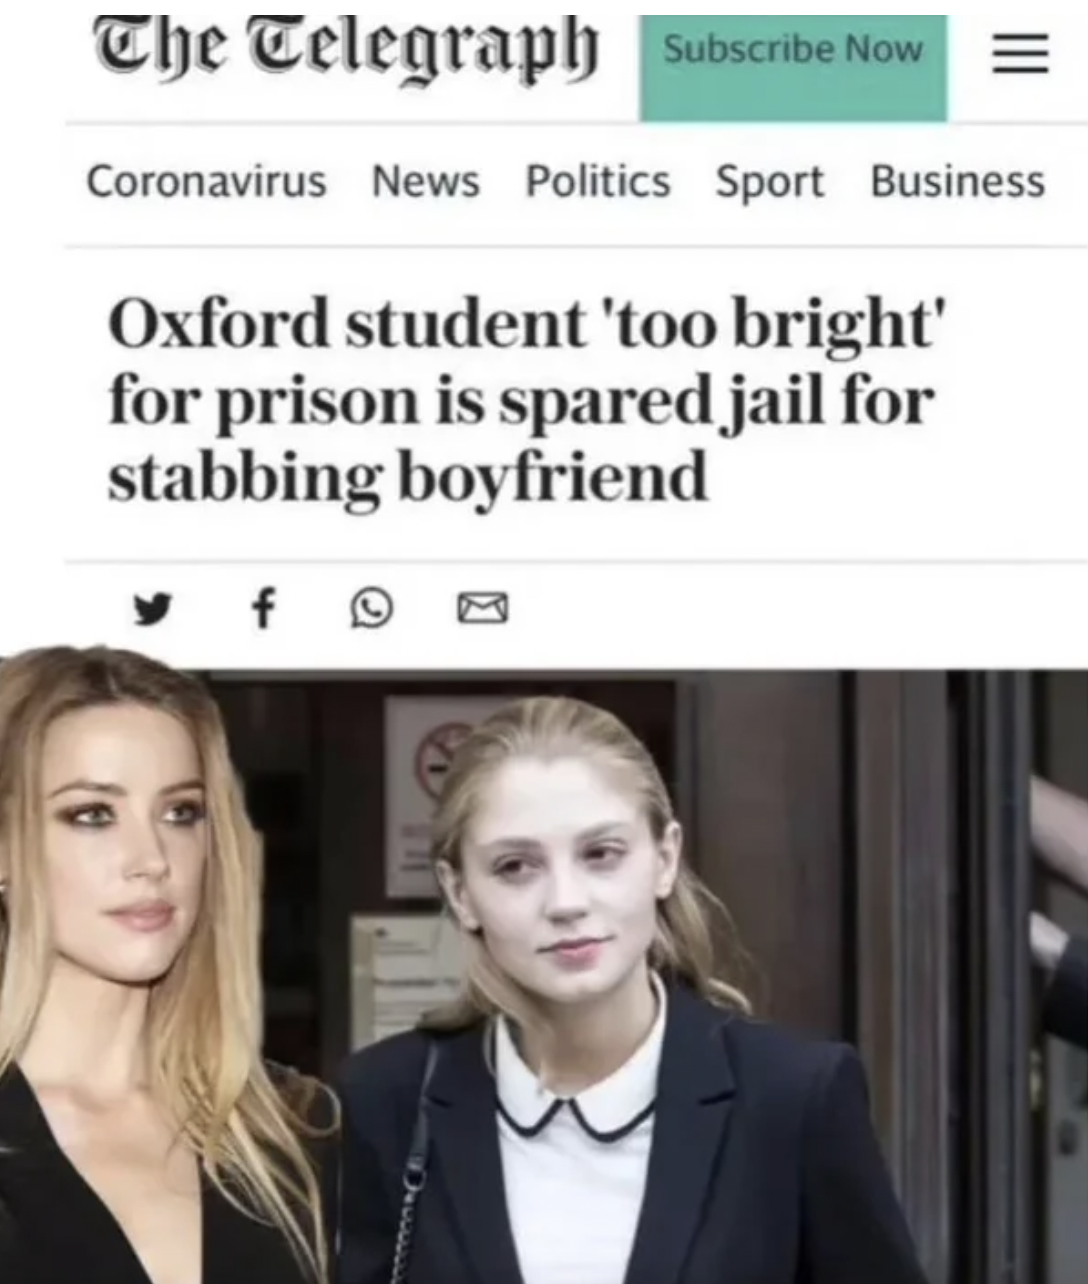 Fails and Facepalms - times - The Telegraph Subscribe Now Coronavirus News Politics Sport Business Oxford student 'too bright' for prison is spared jail for stabbing boyfriend